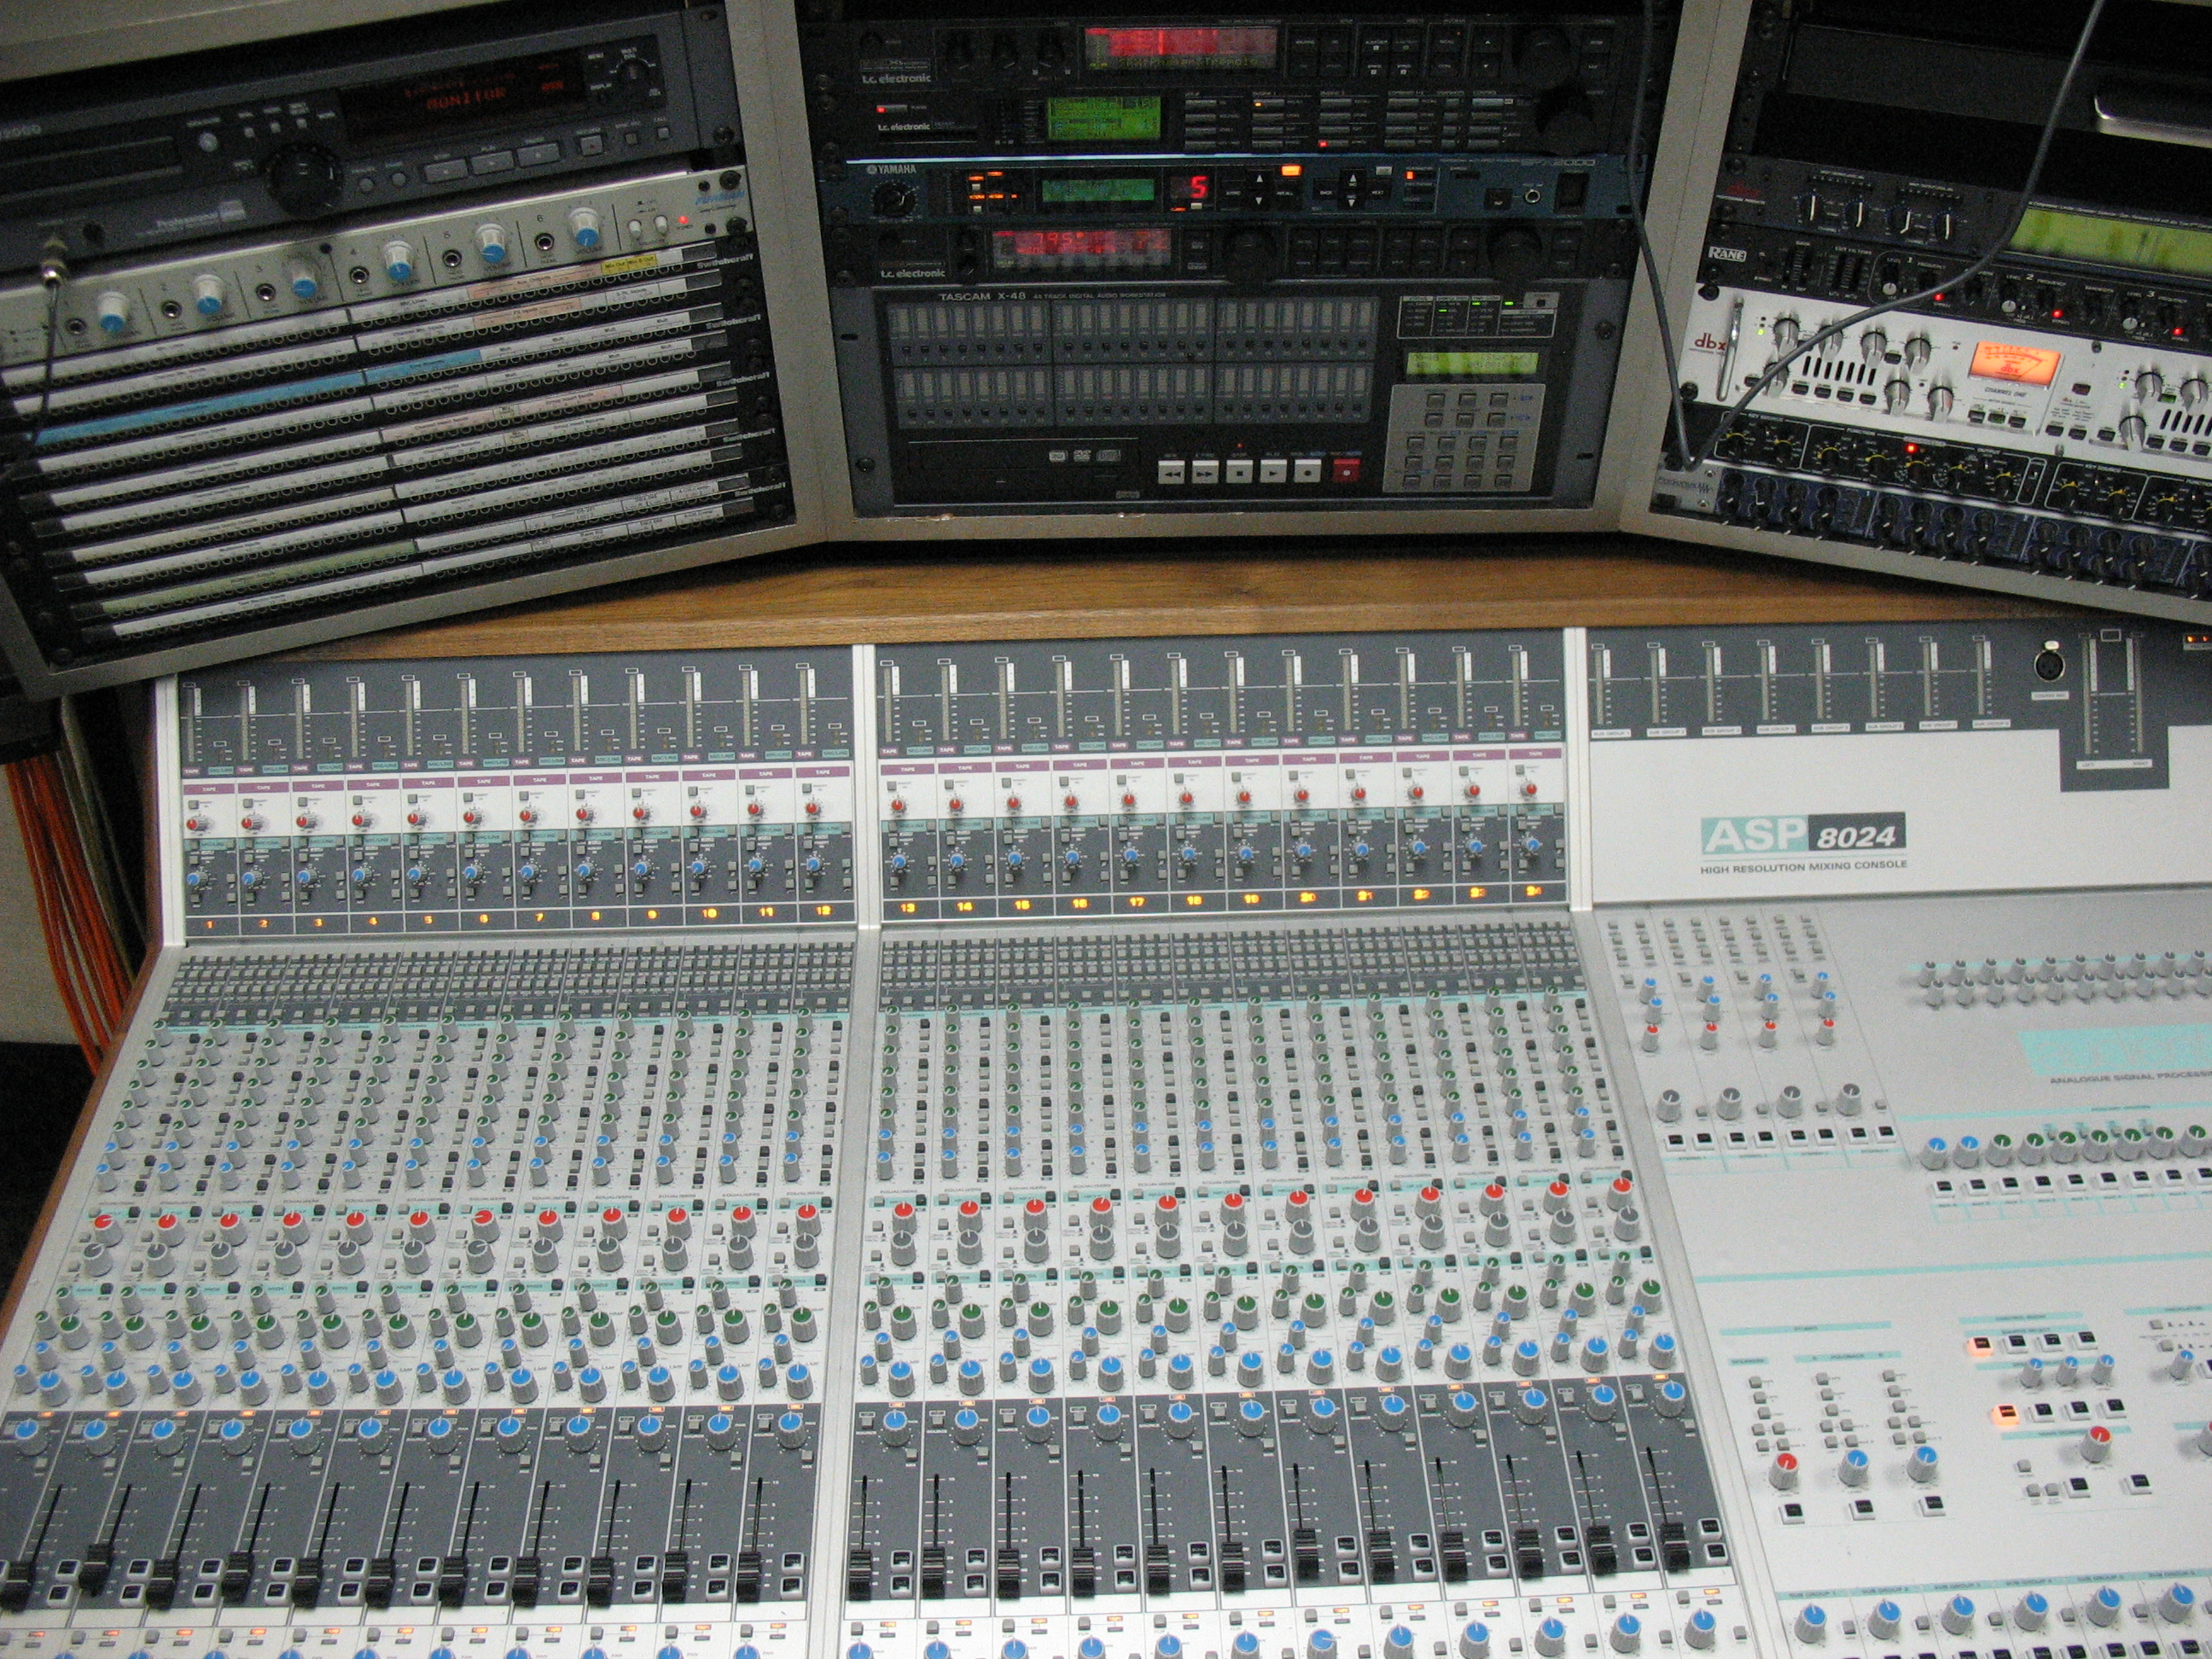 Audient ASP8024 for mixing